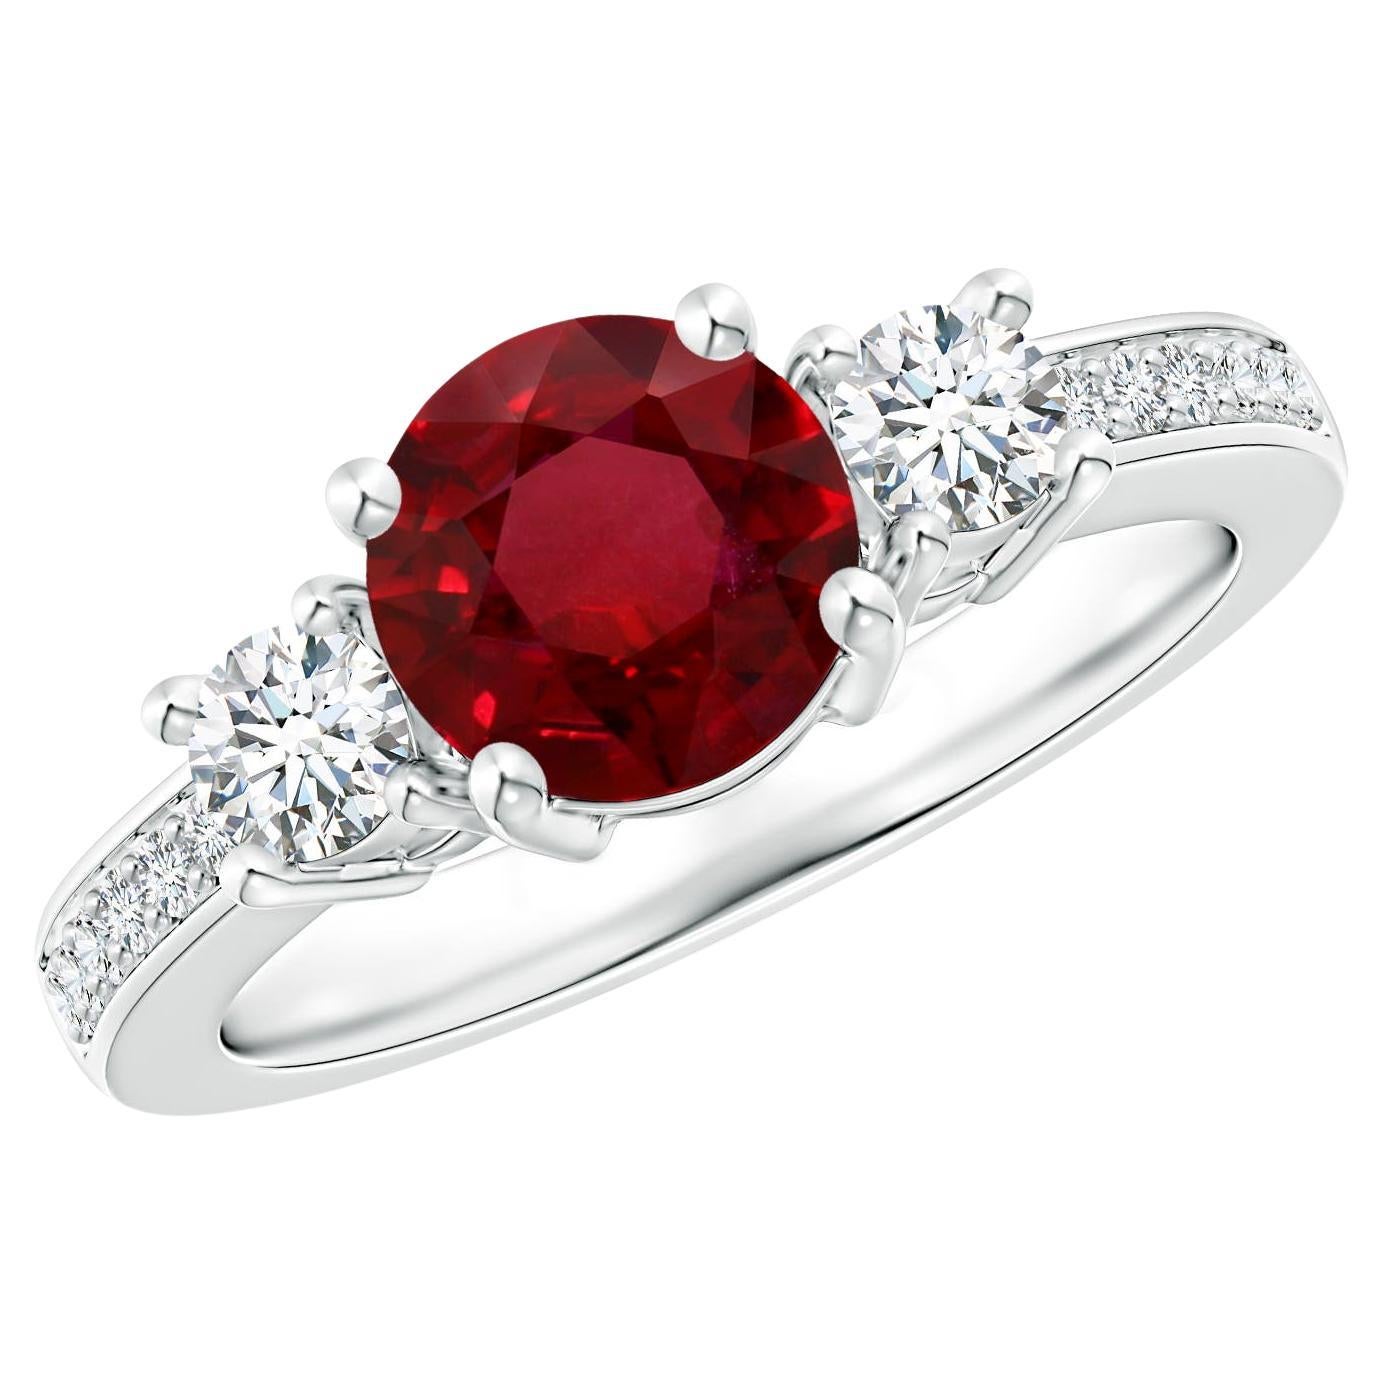 For Sale:  Angara Gia Certified Natural Classic Ruby and Diamond Ring in White Gold